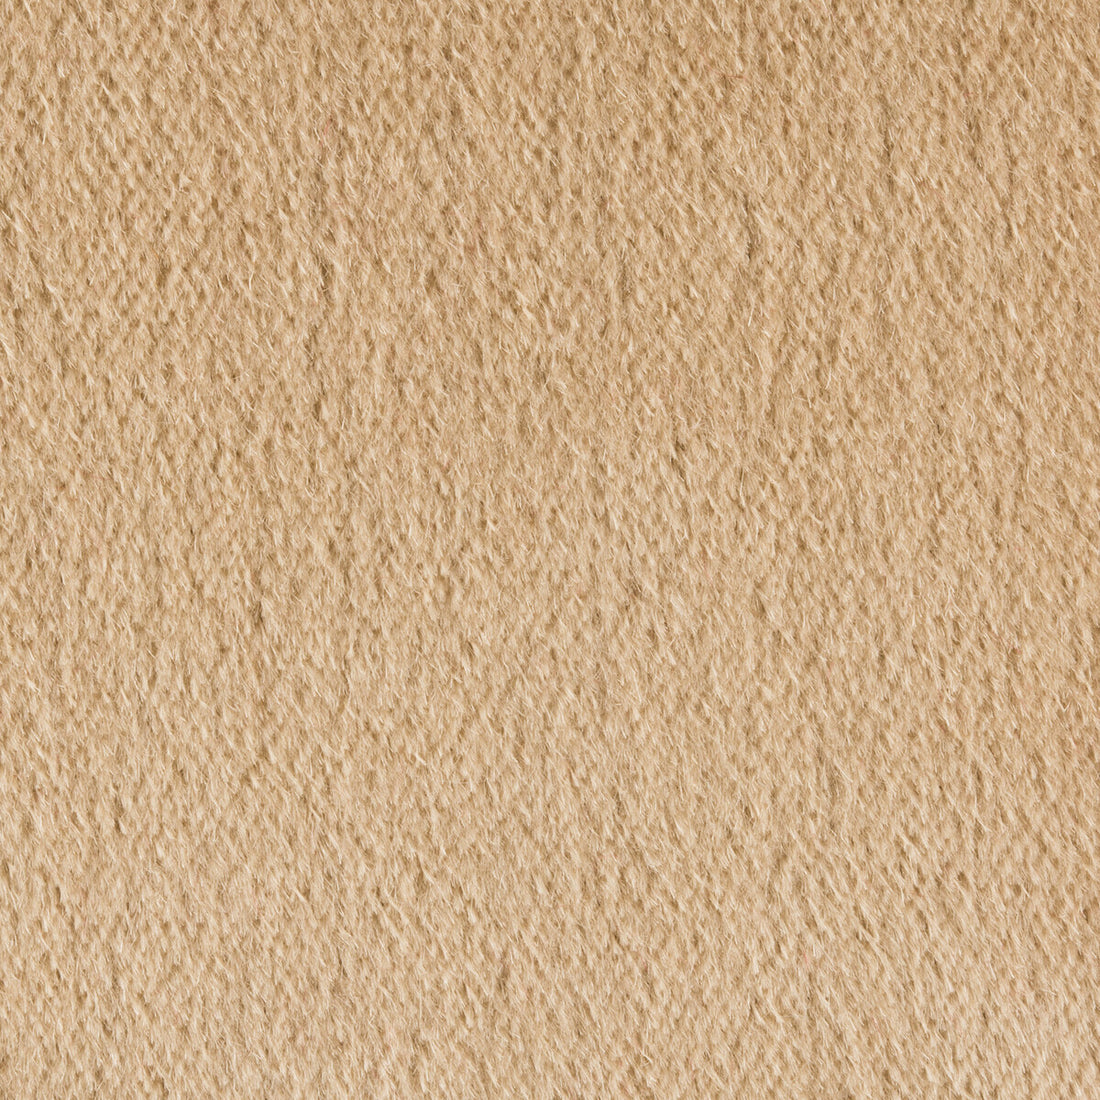 Plazzo Mohair fabric in camel color - pattern 34259.801.0 - by Kravet Couture